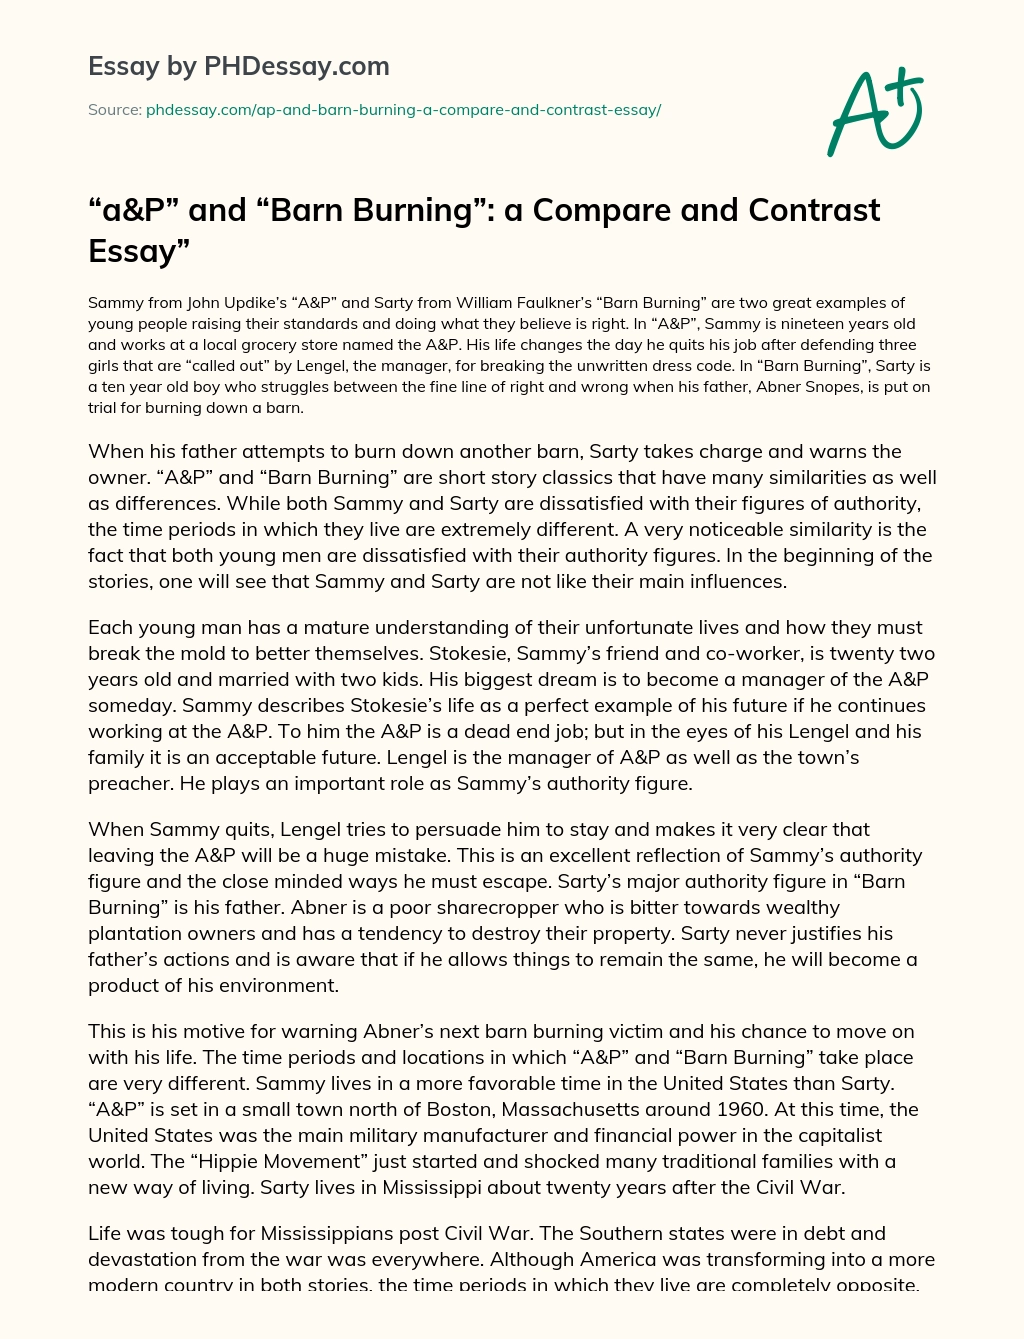 A&P and Barn Burning: a Compare and Contrast Essay essay